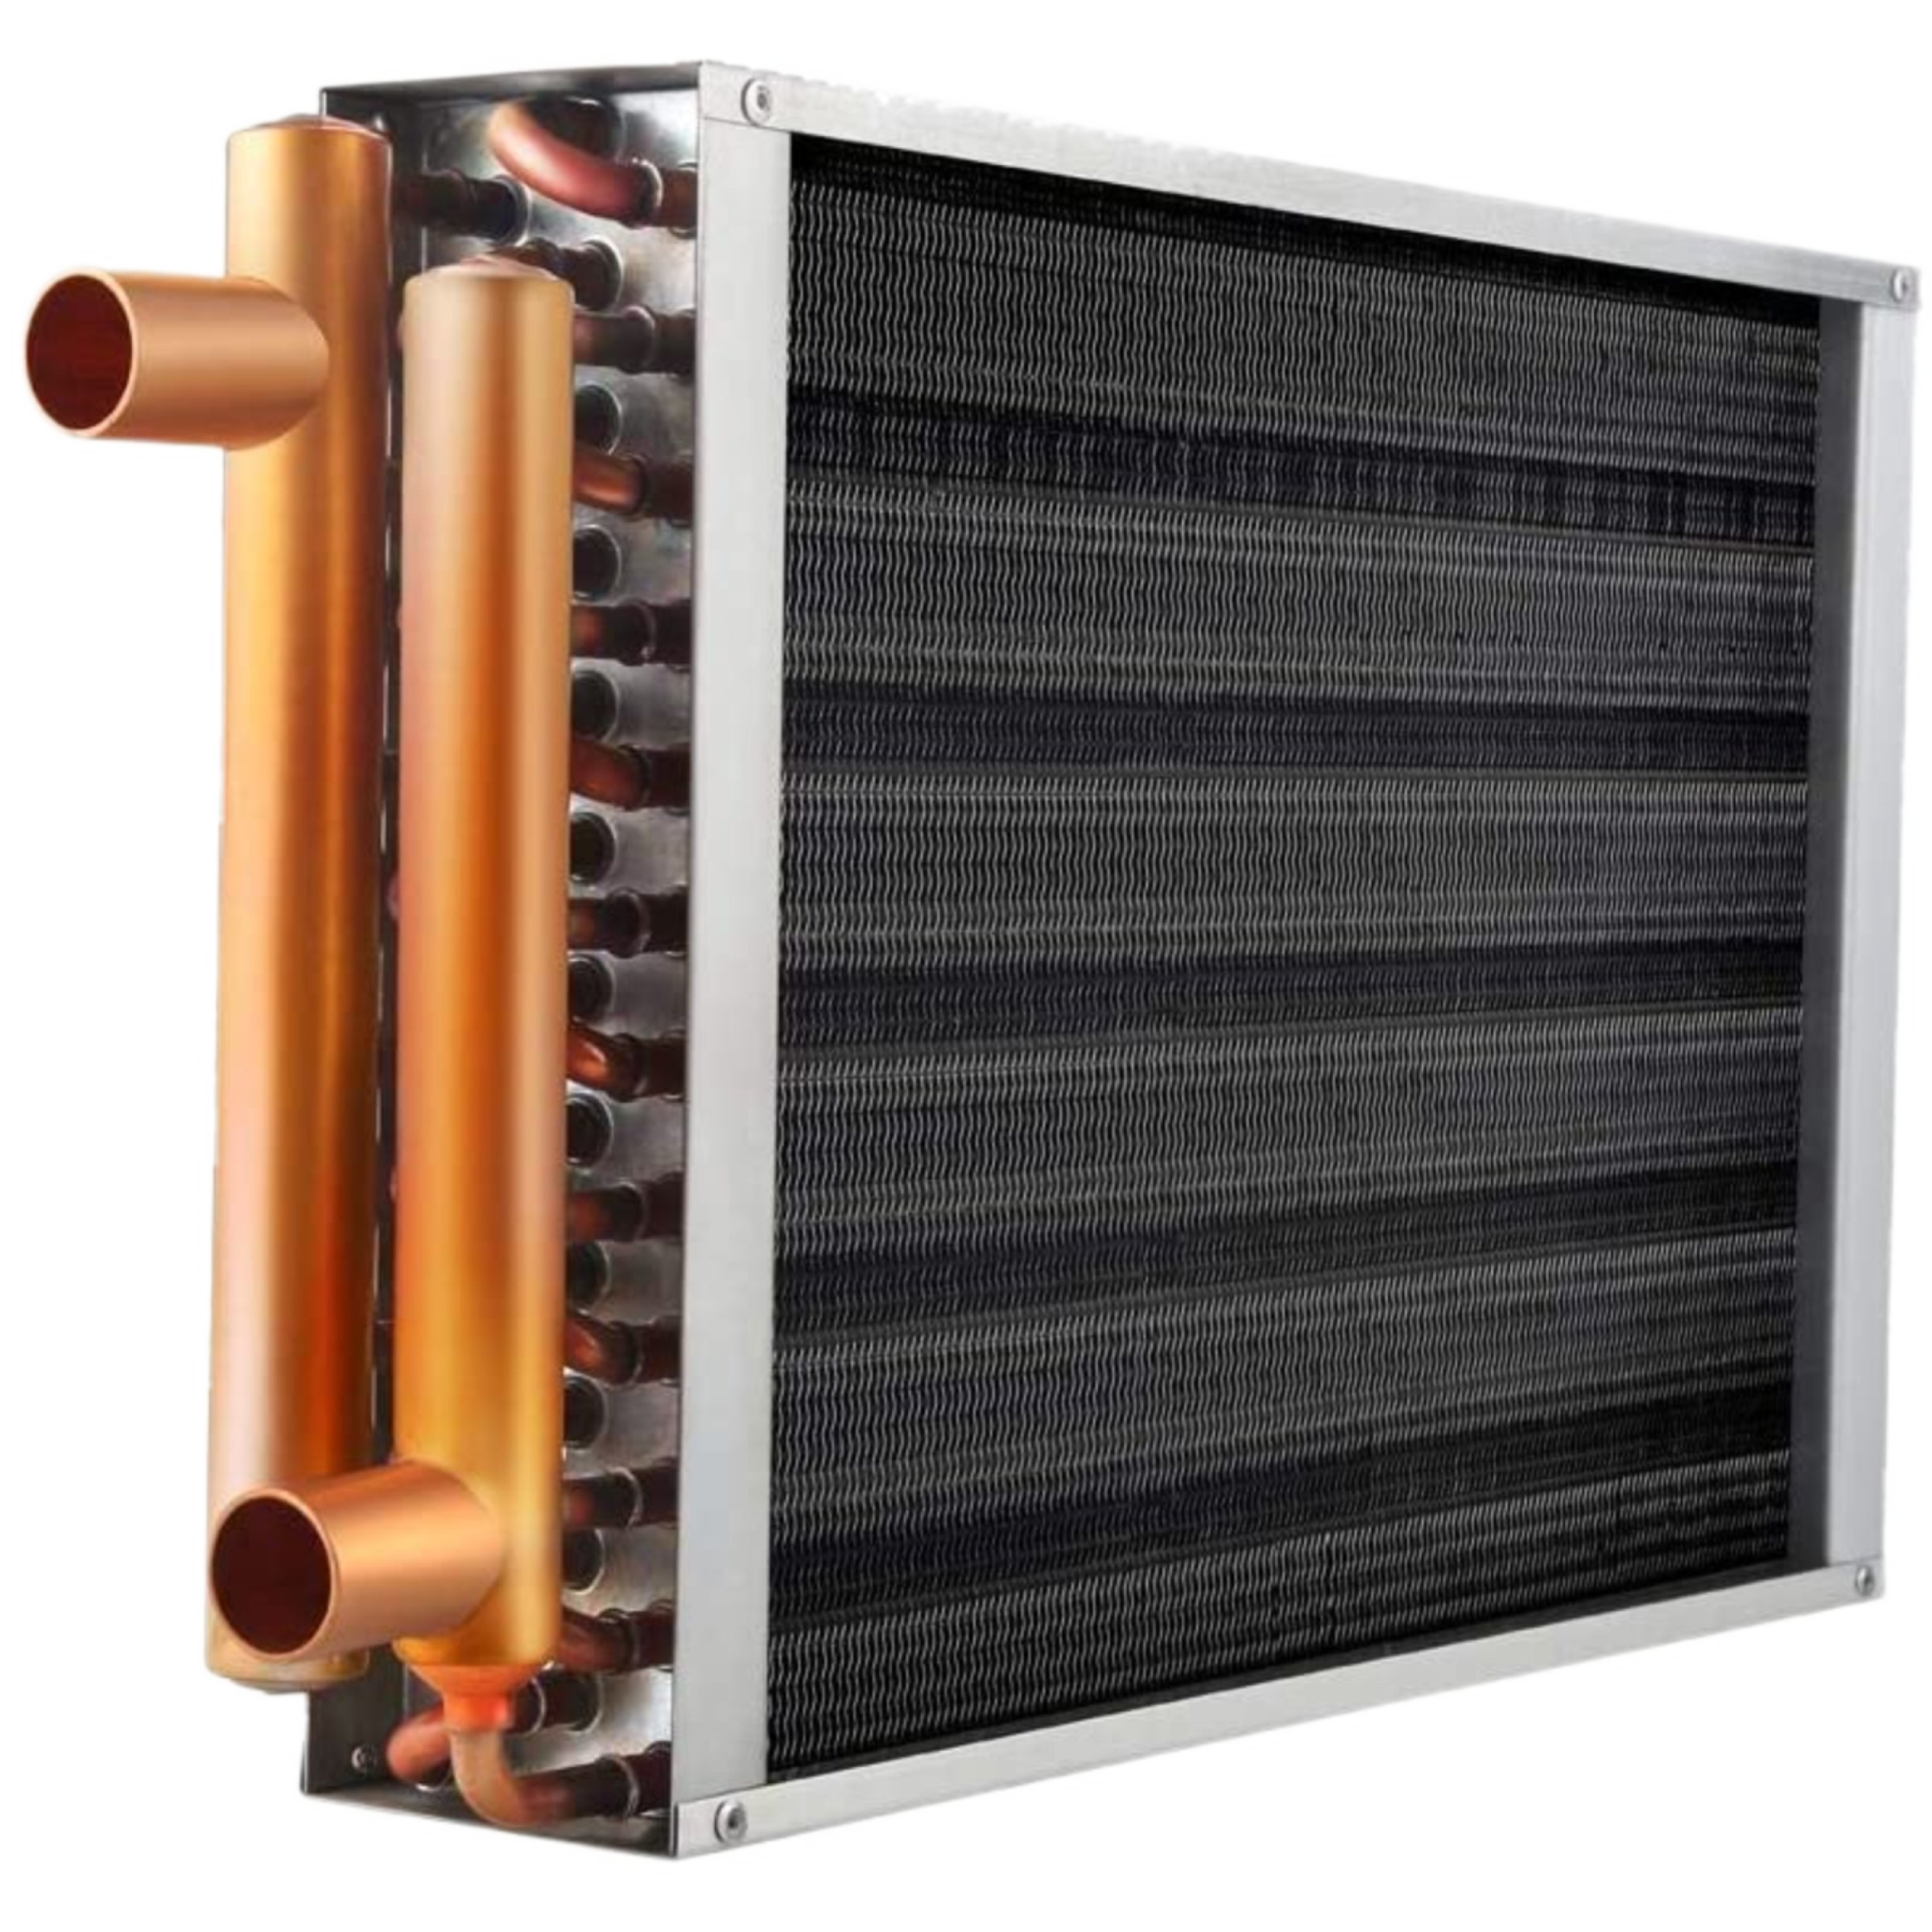 HTL 20 X 20 Hydronic Coil Air to Water Heat Exchanger 20GPM, PD 1.38 PSI, 144787 BTU/h to 160000 BTU/h